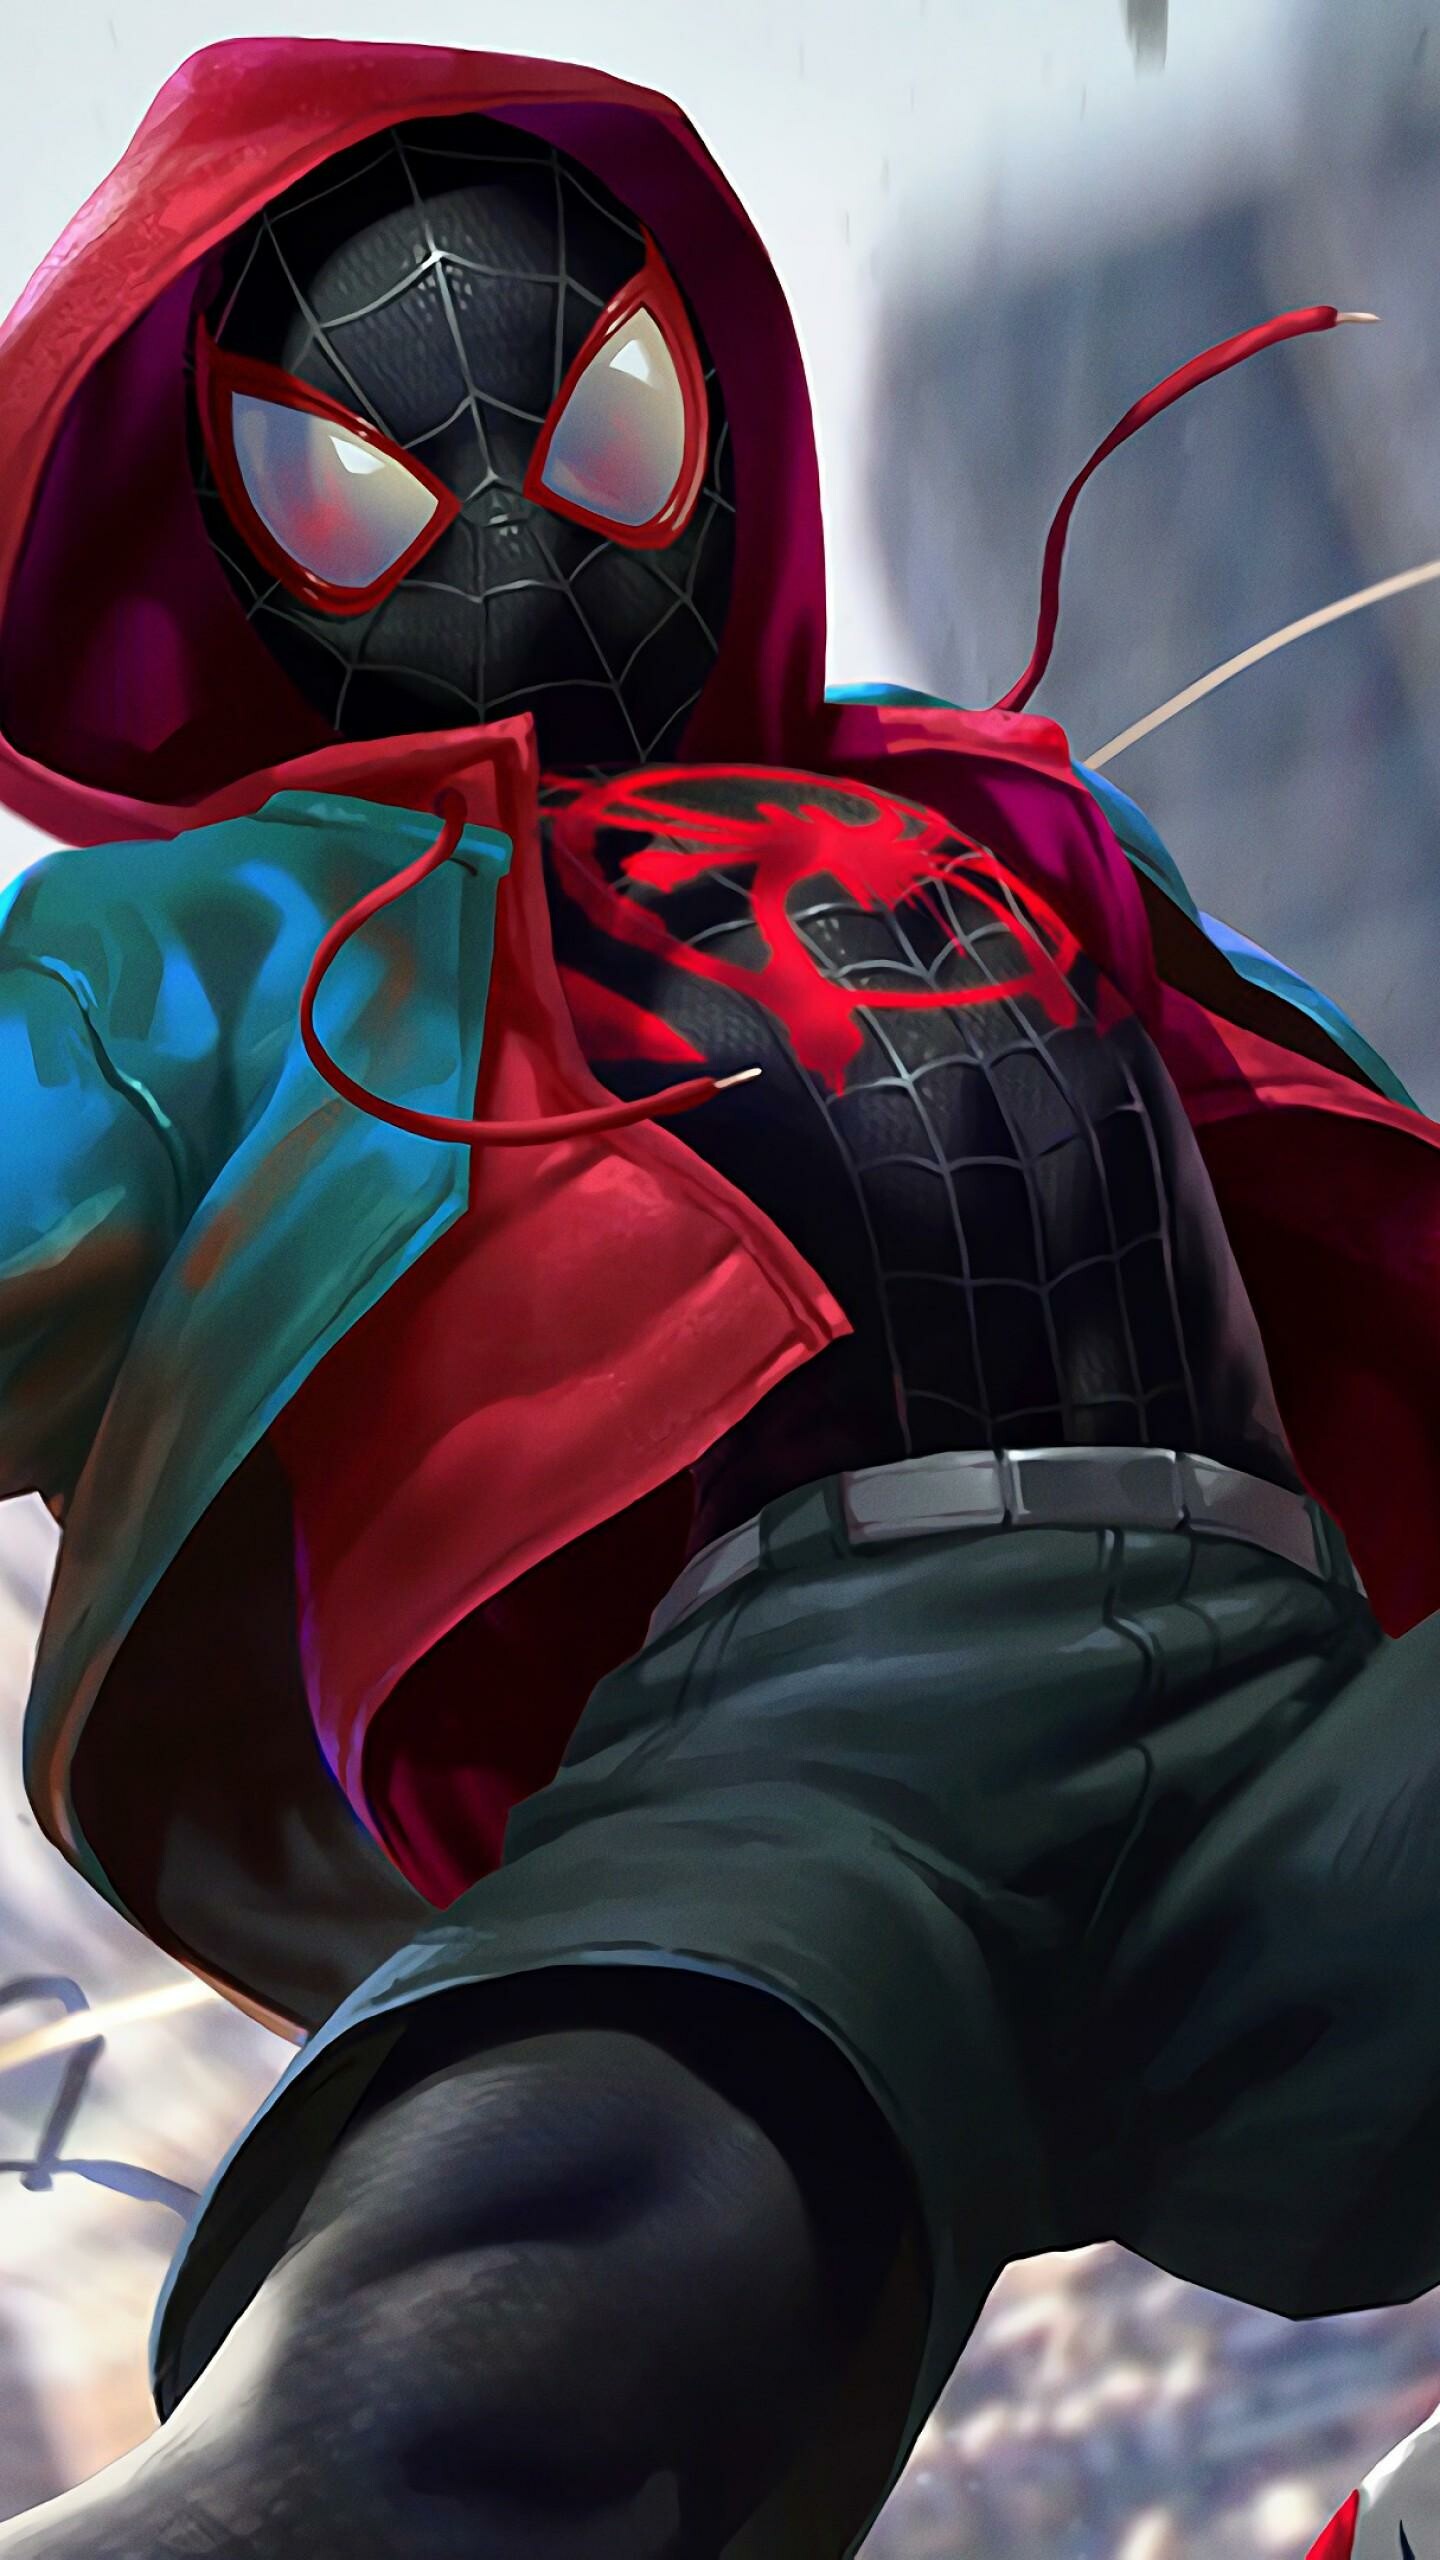 Spider-Man: Into the Spider-Verse: Miles Morales, able to blend himself and his clothing into his surroundings. 1440x2560 HD Background.